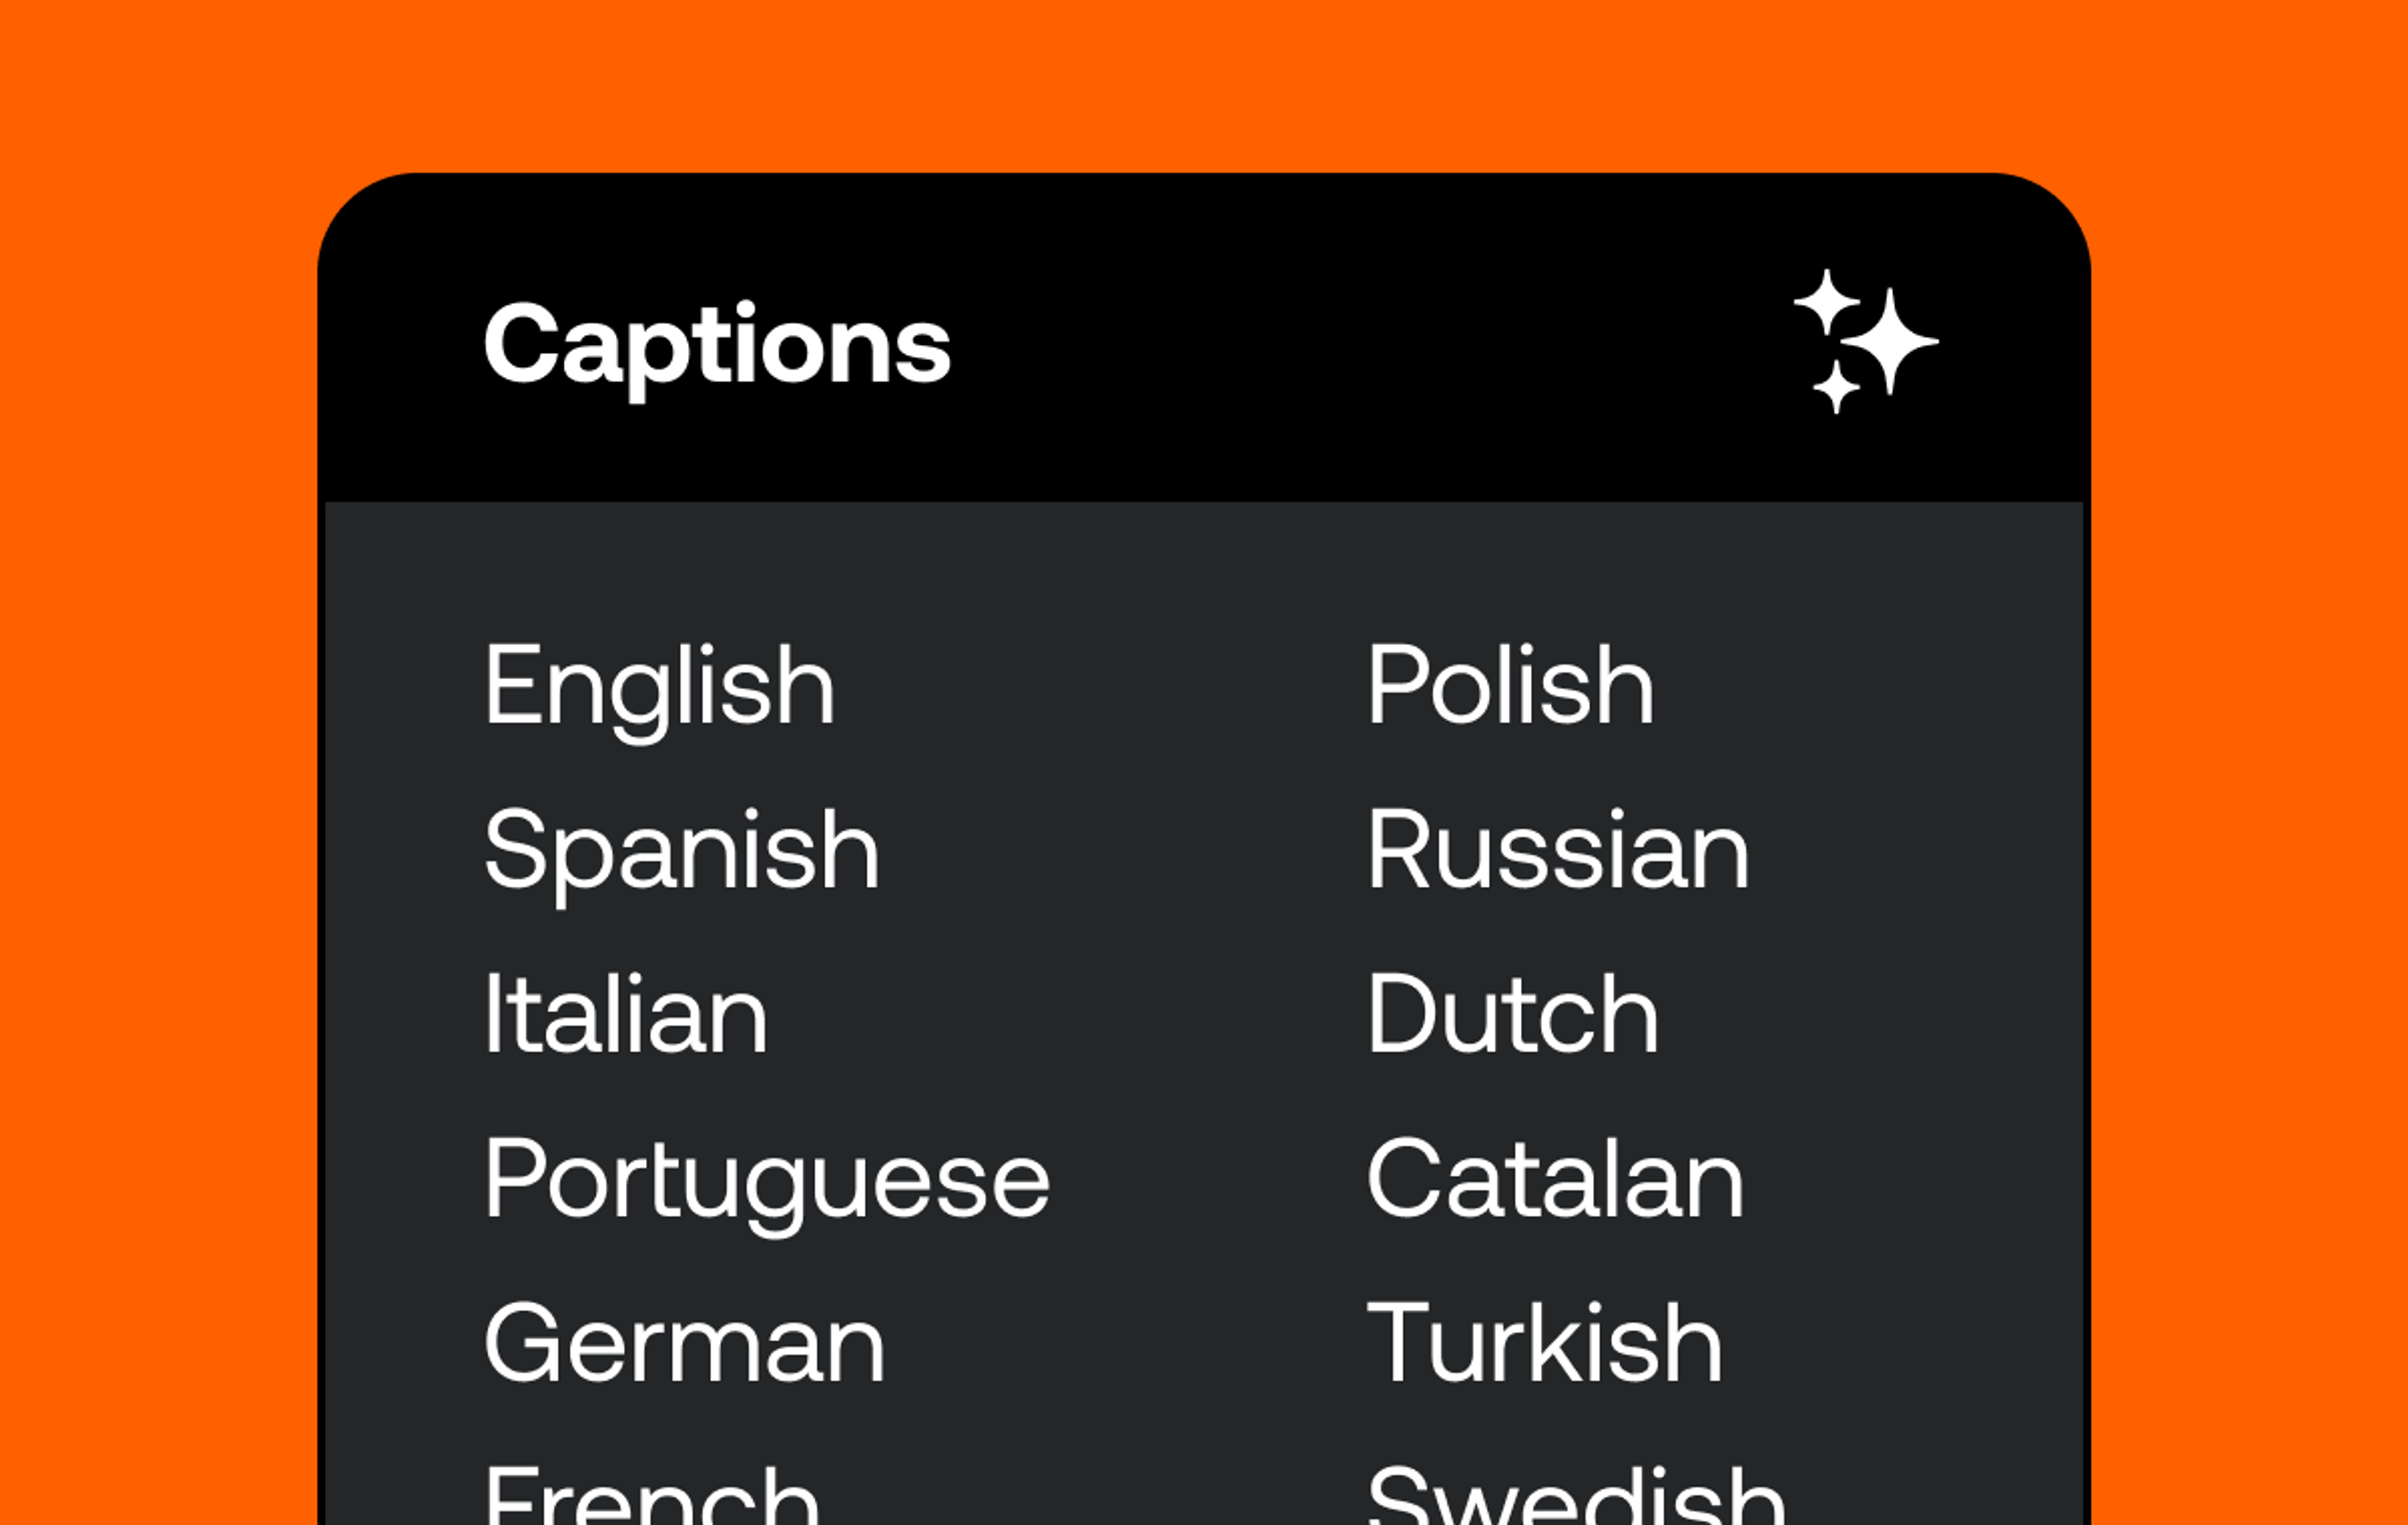 On an orange background, is a black box that reads Captions with a list of different languages